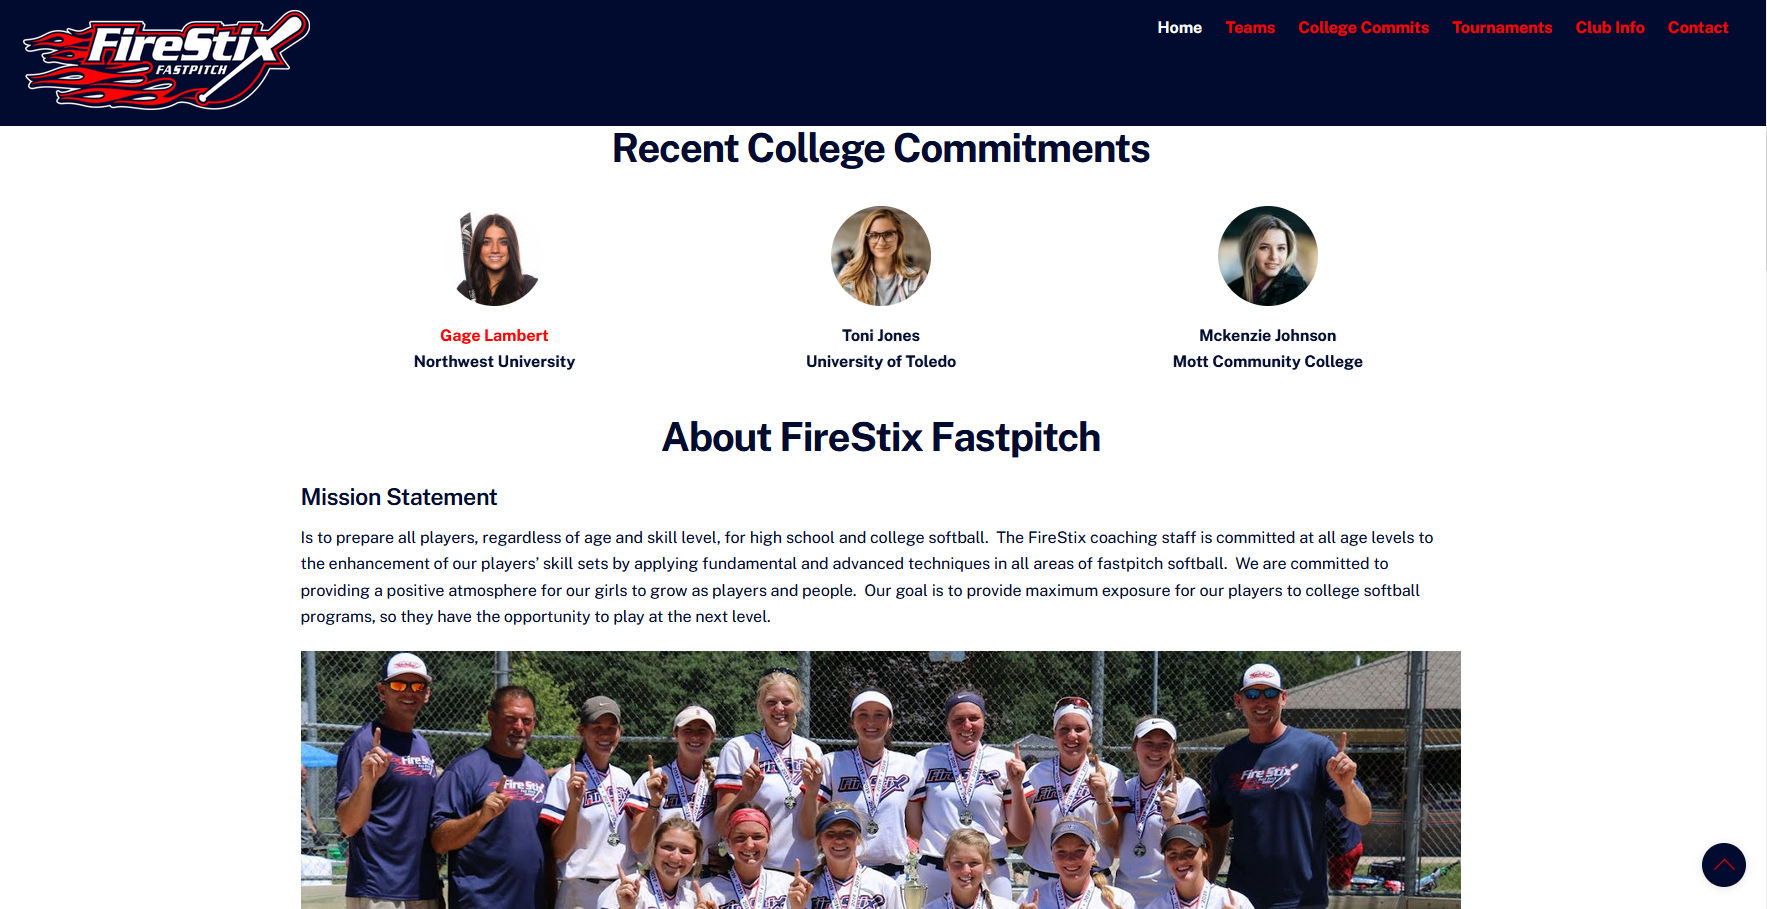 FireStix Fastpitch by Cruthers Enterprises